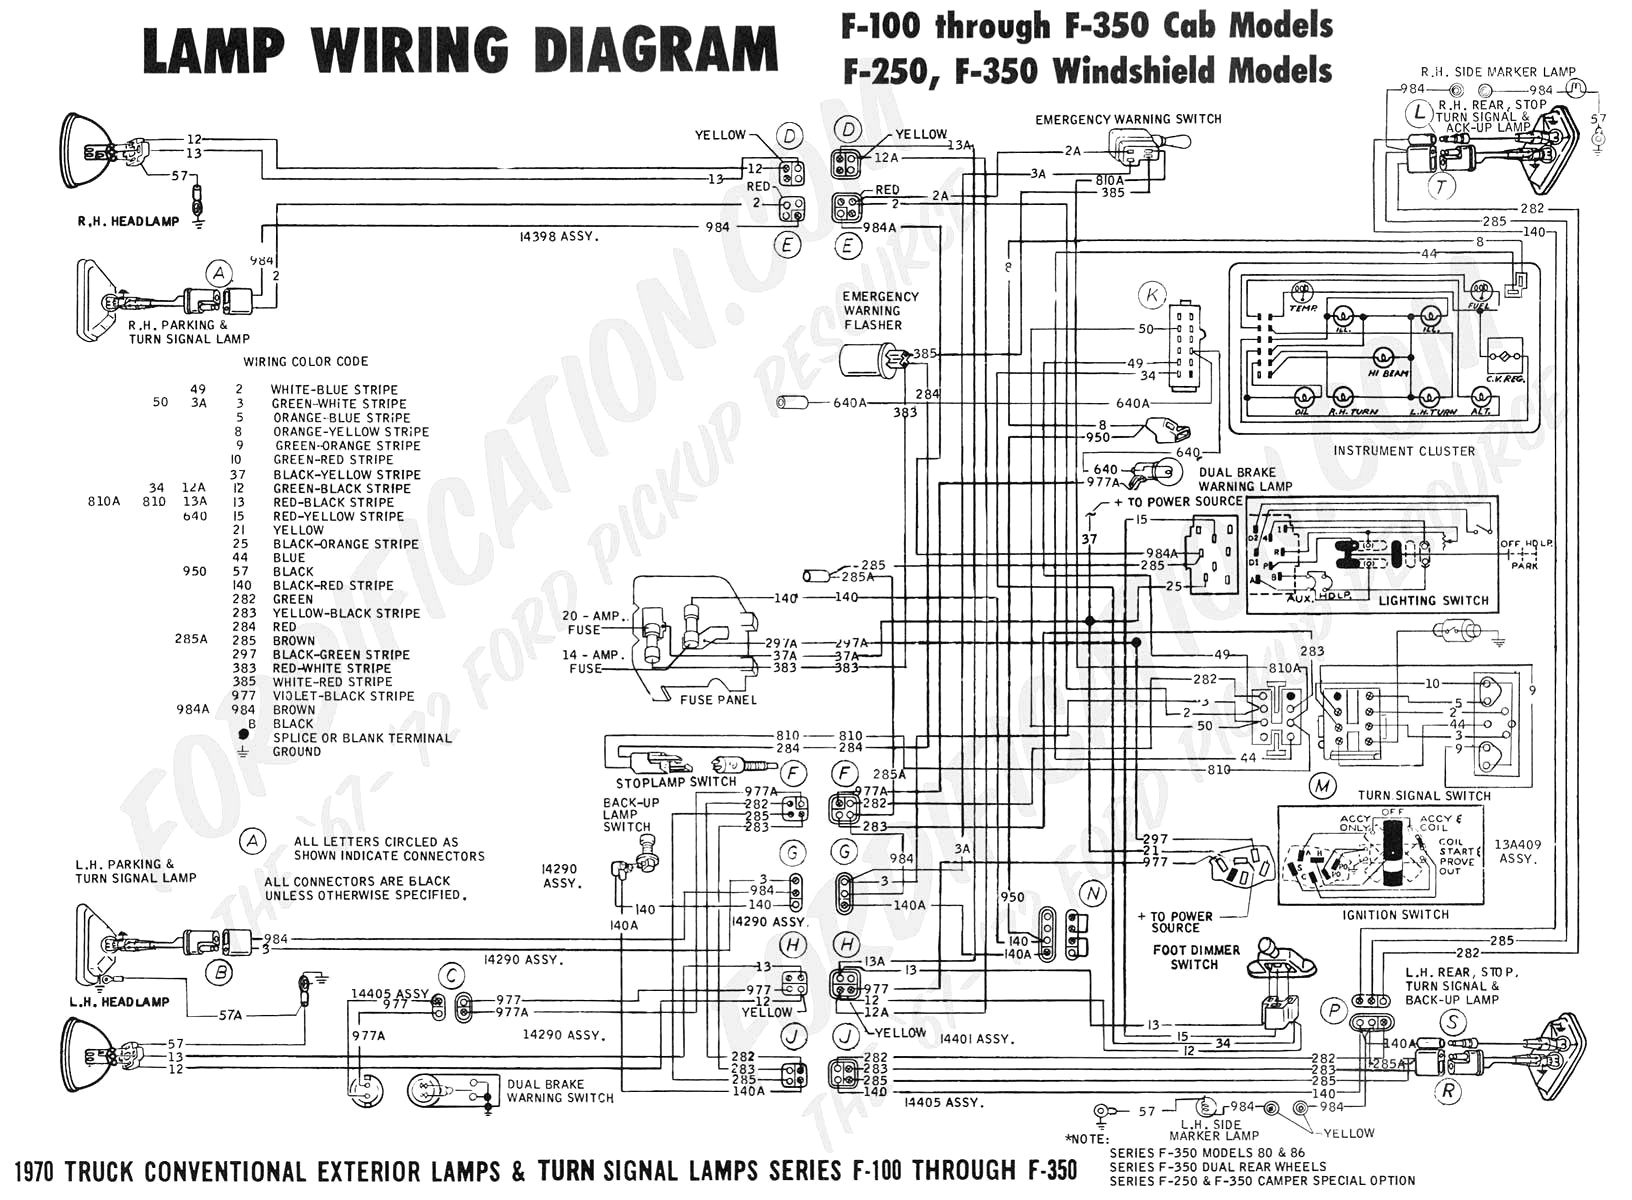 wiring diagram for 1988 honda crx free download wiring diagram view 92 95 honda civic ignition switch diagram free download wiring